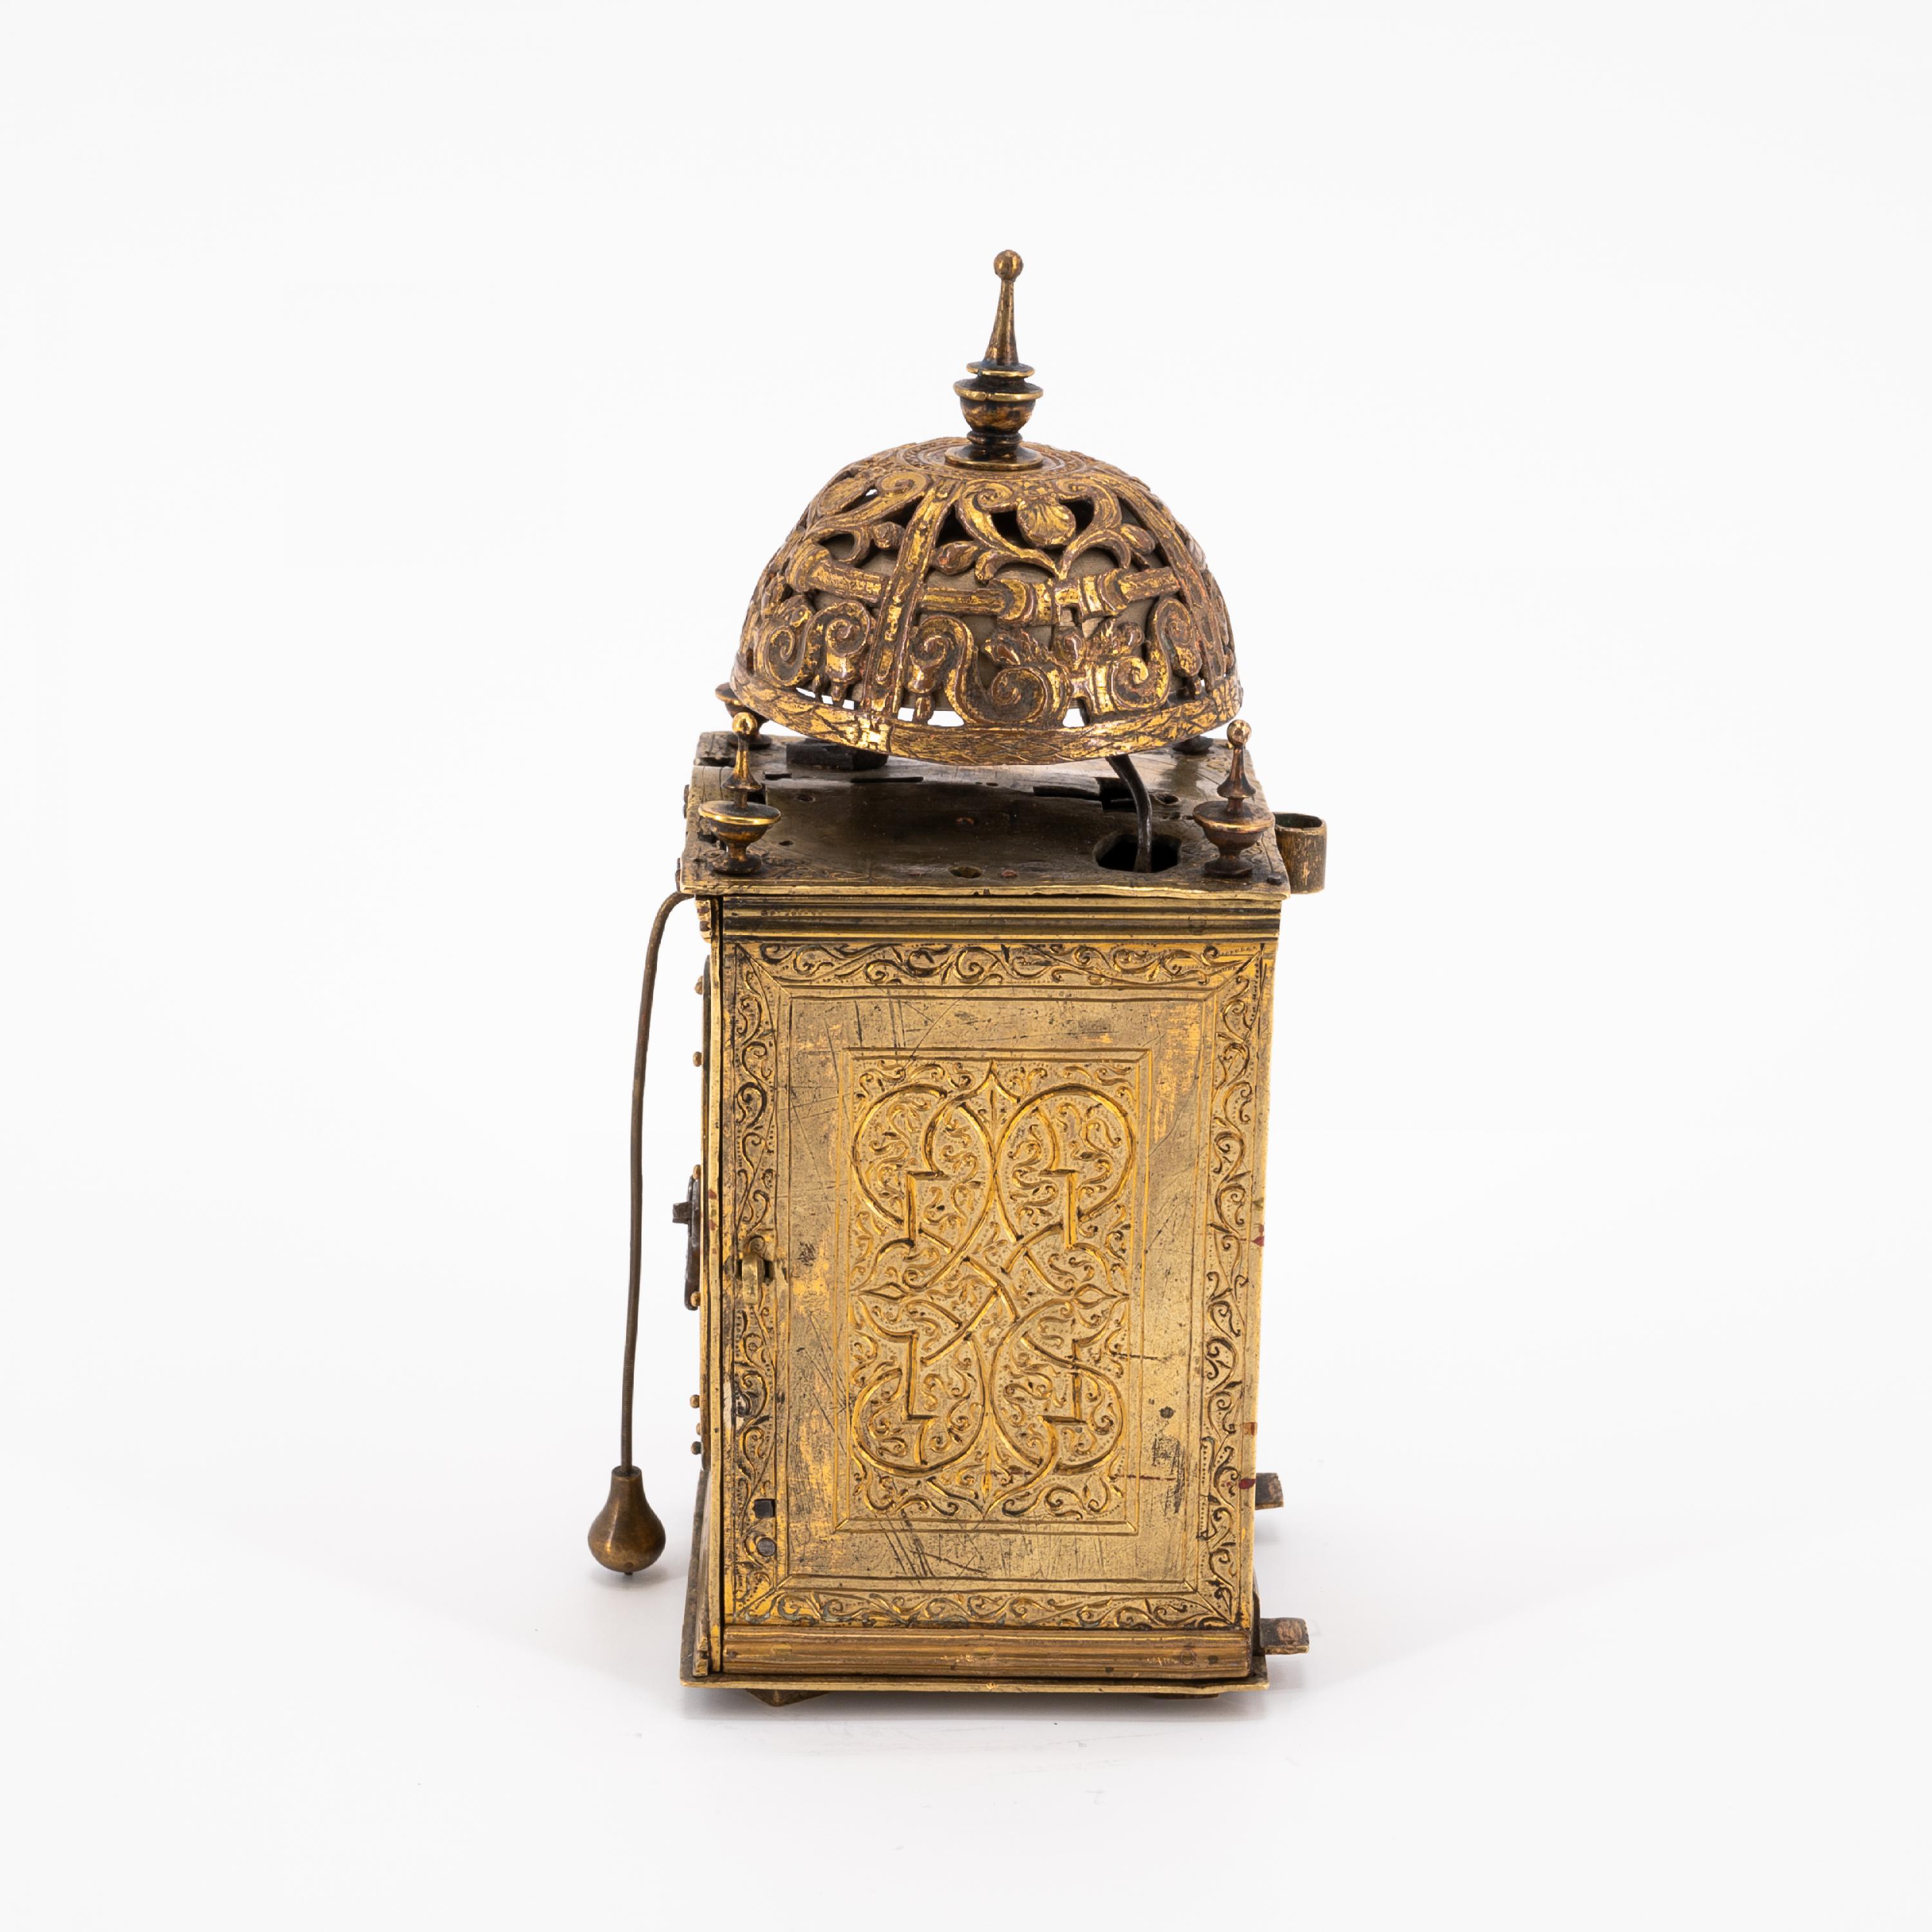 BRASS TABERNACLE CLOCK WITH FRONT ZAPPLER - Image 3 of 6